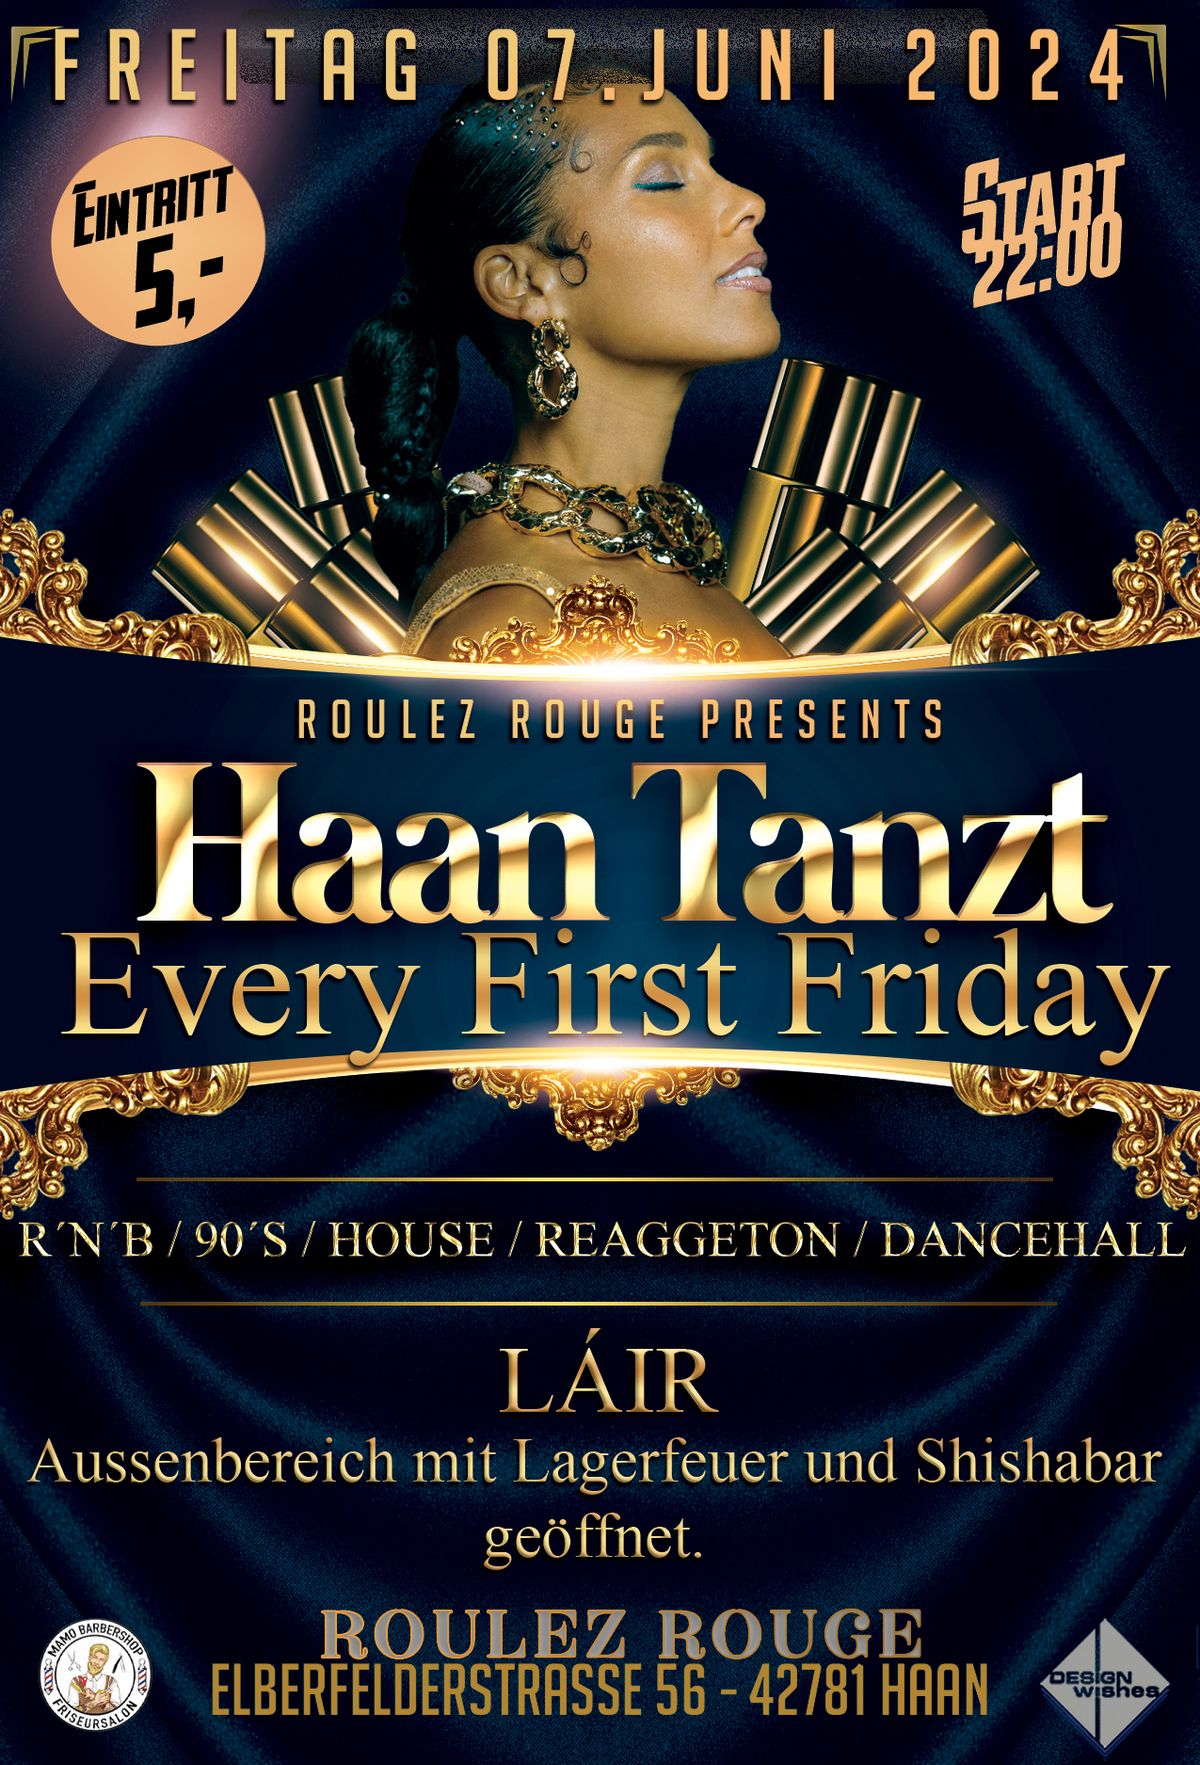 HAAN TANZT - Every First Friday !!! Opening Outdoorbereich !!!